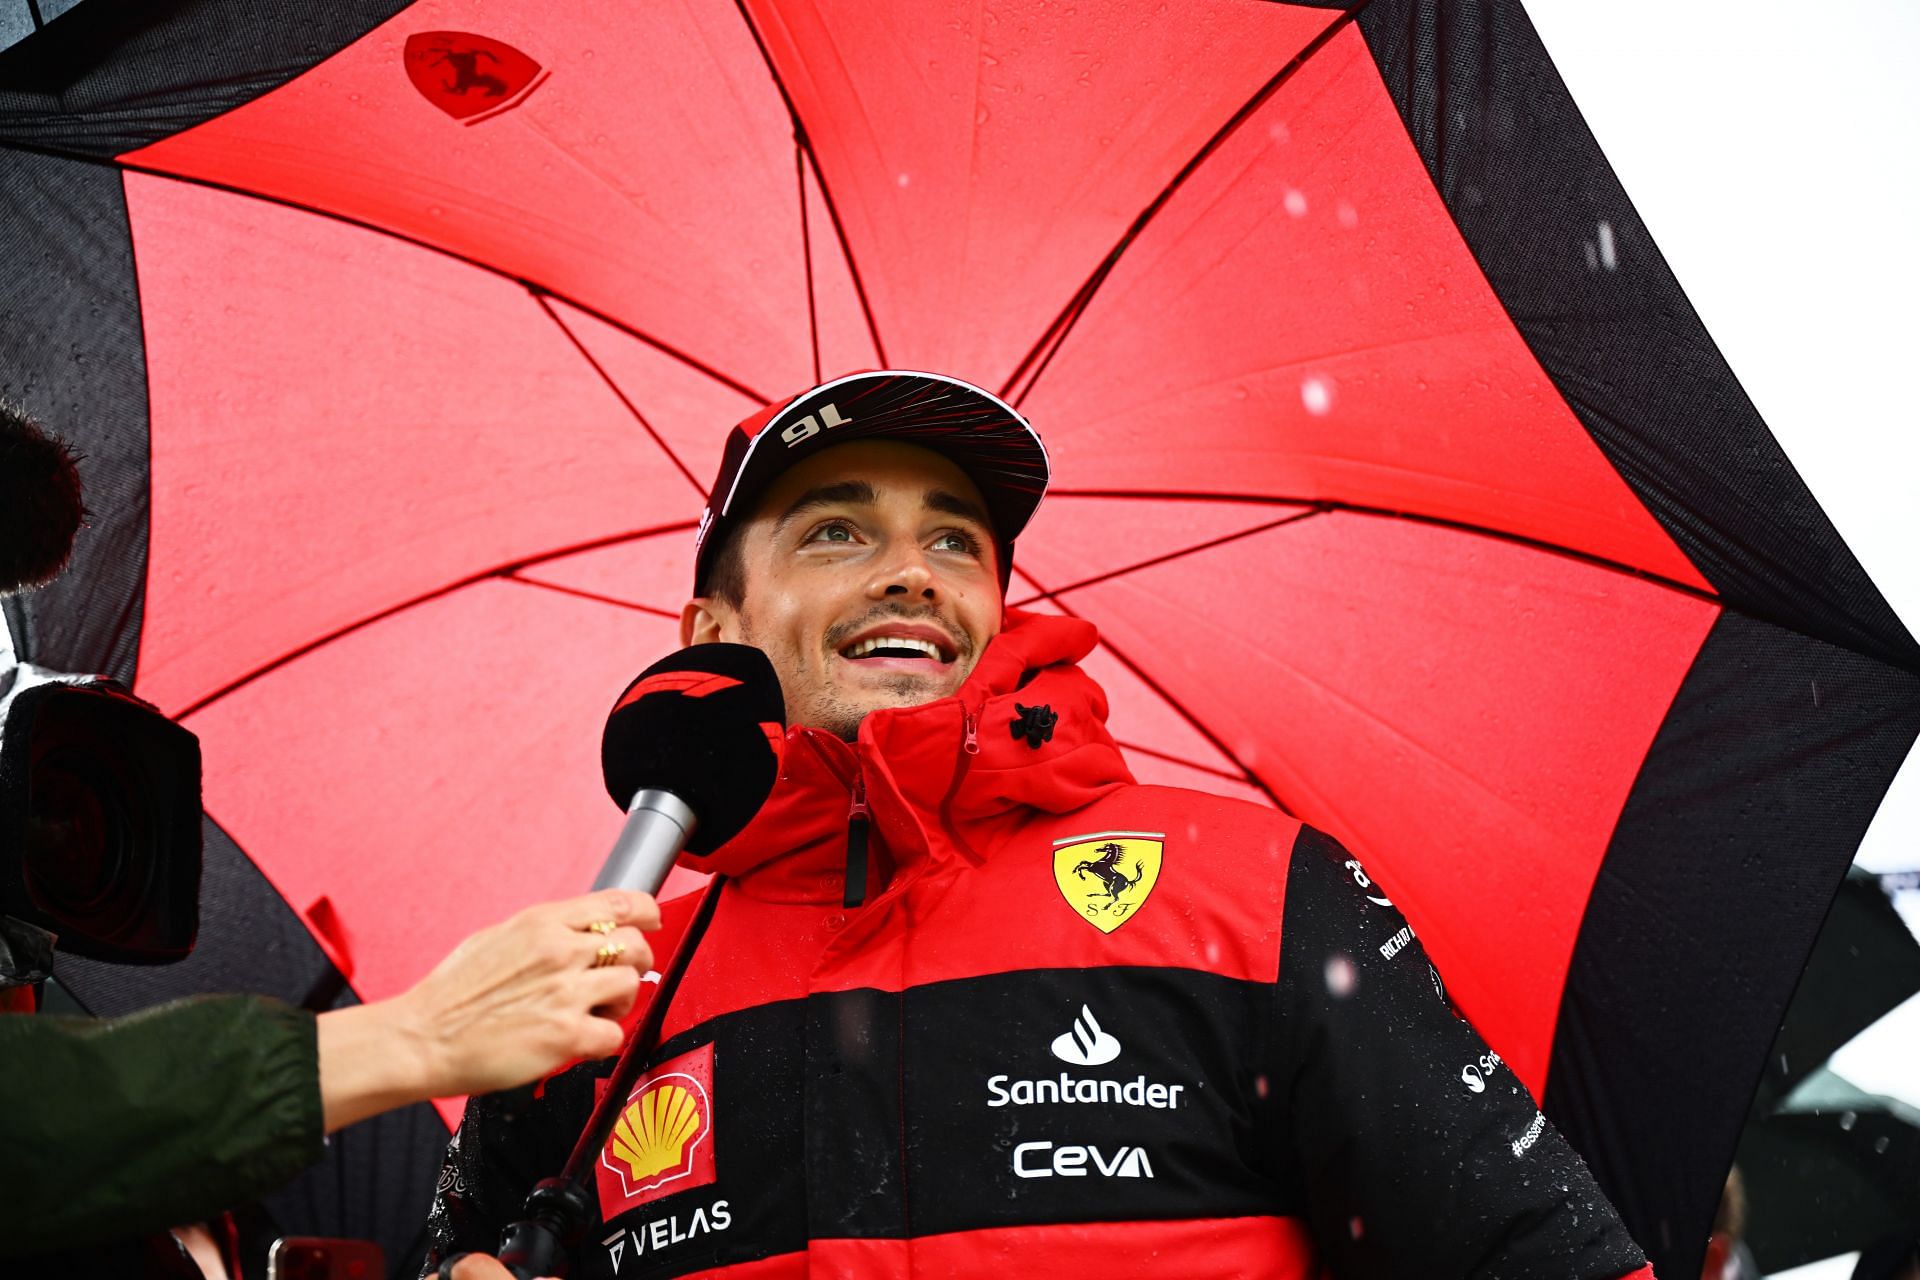 Charles Leclerc is leading the championship after four races this season